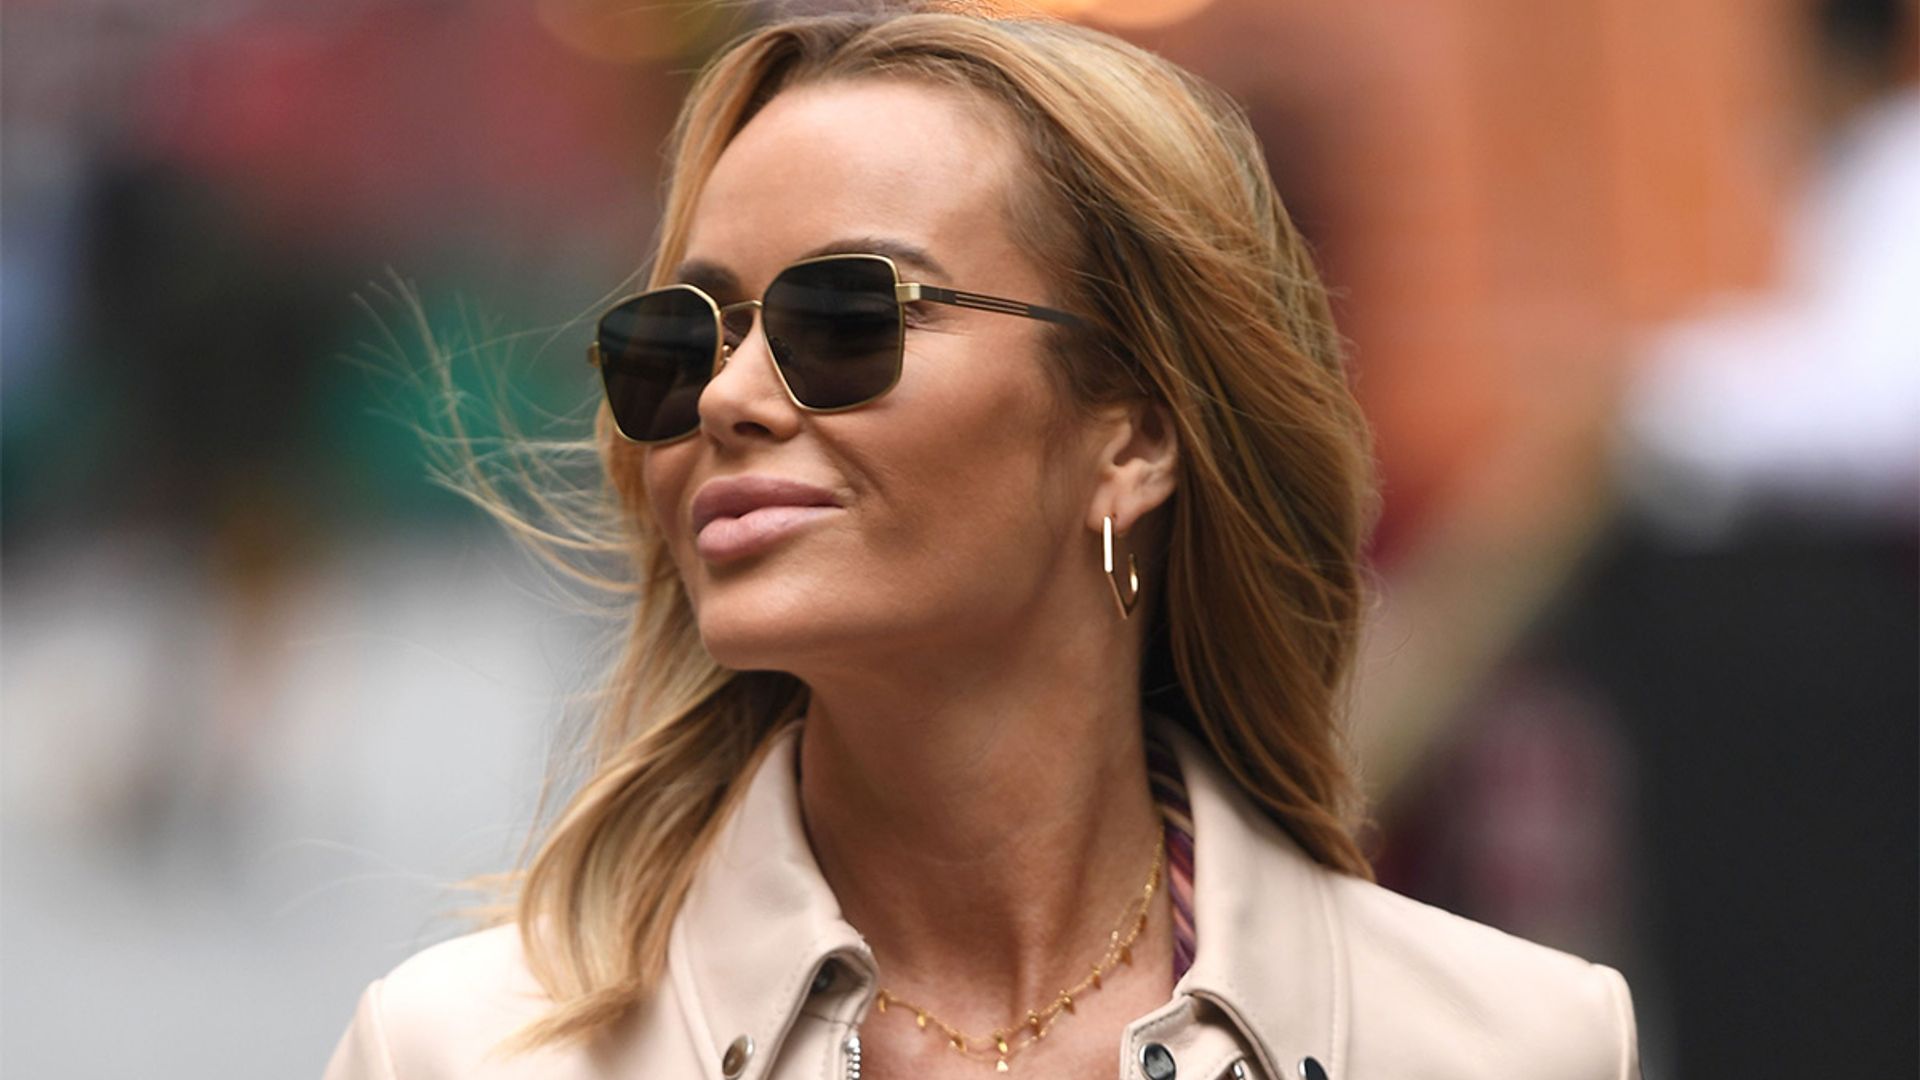 Amanda Holden's pink striped dress makes us want to go on holiday